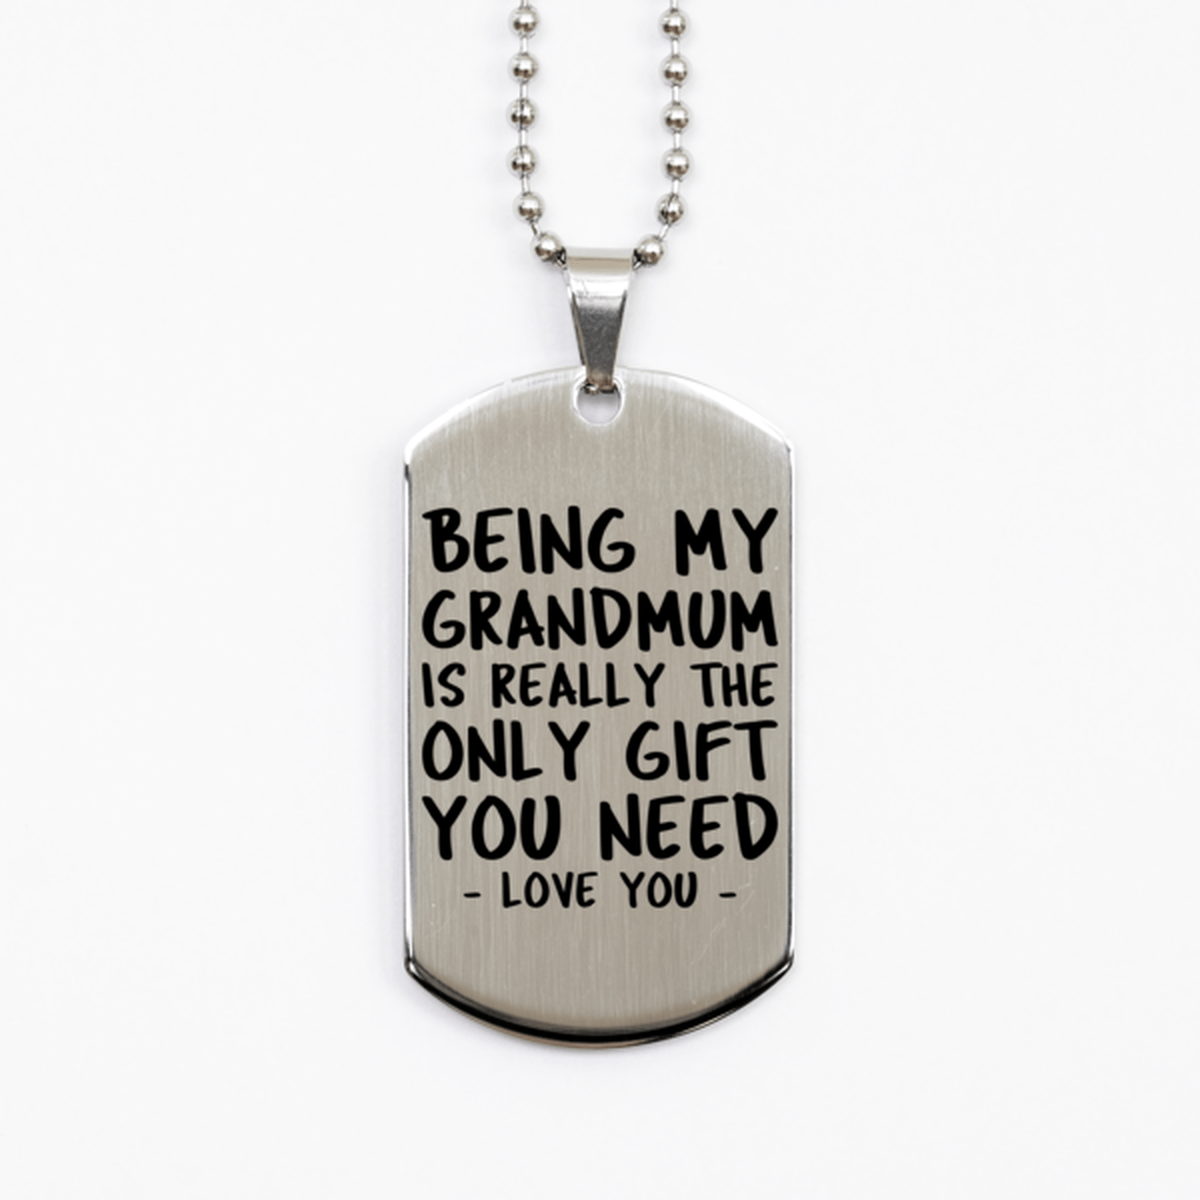 Funny Grandmum Silver Dog Tag Necklace, Being My Grandmum Is Really the Only Gift You Need, Best Birthday Gifts for Grandmum